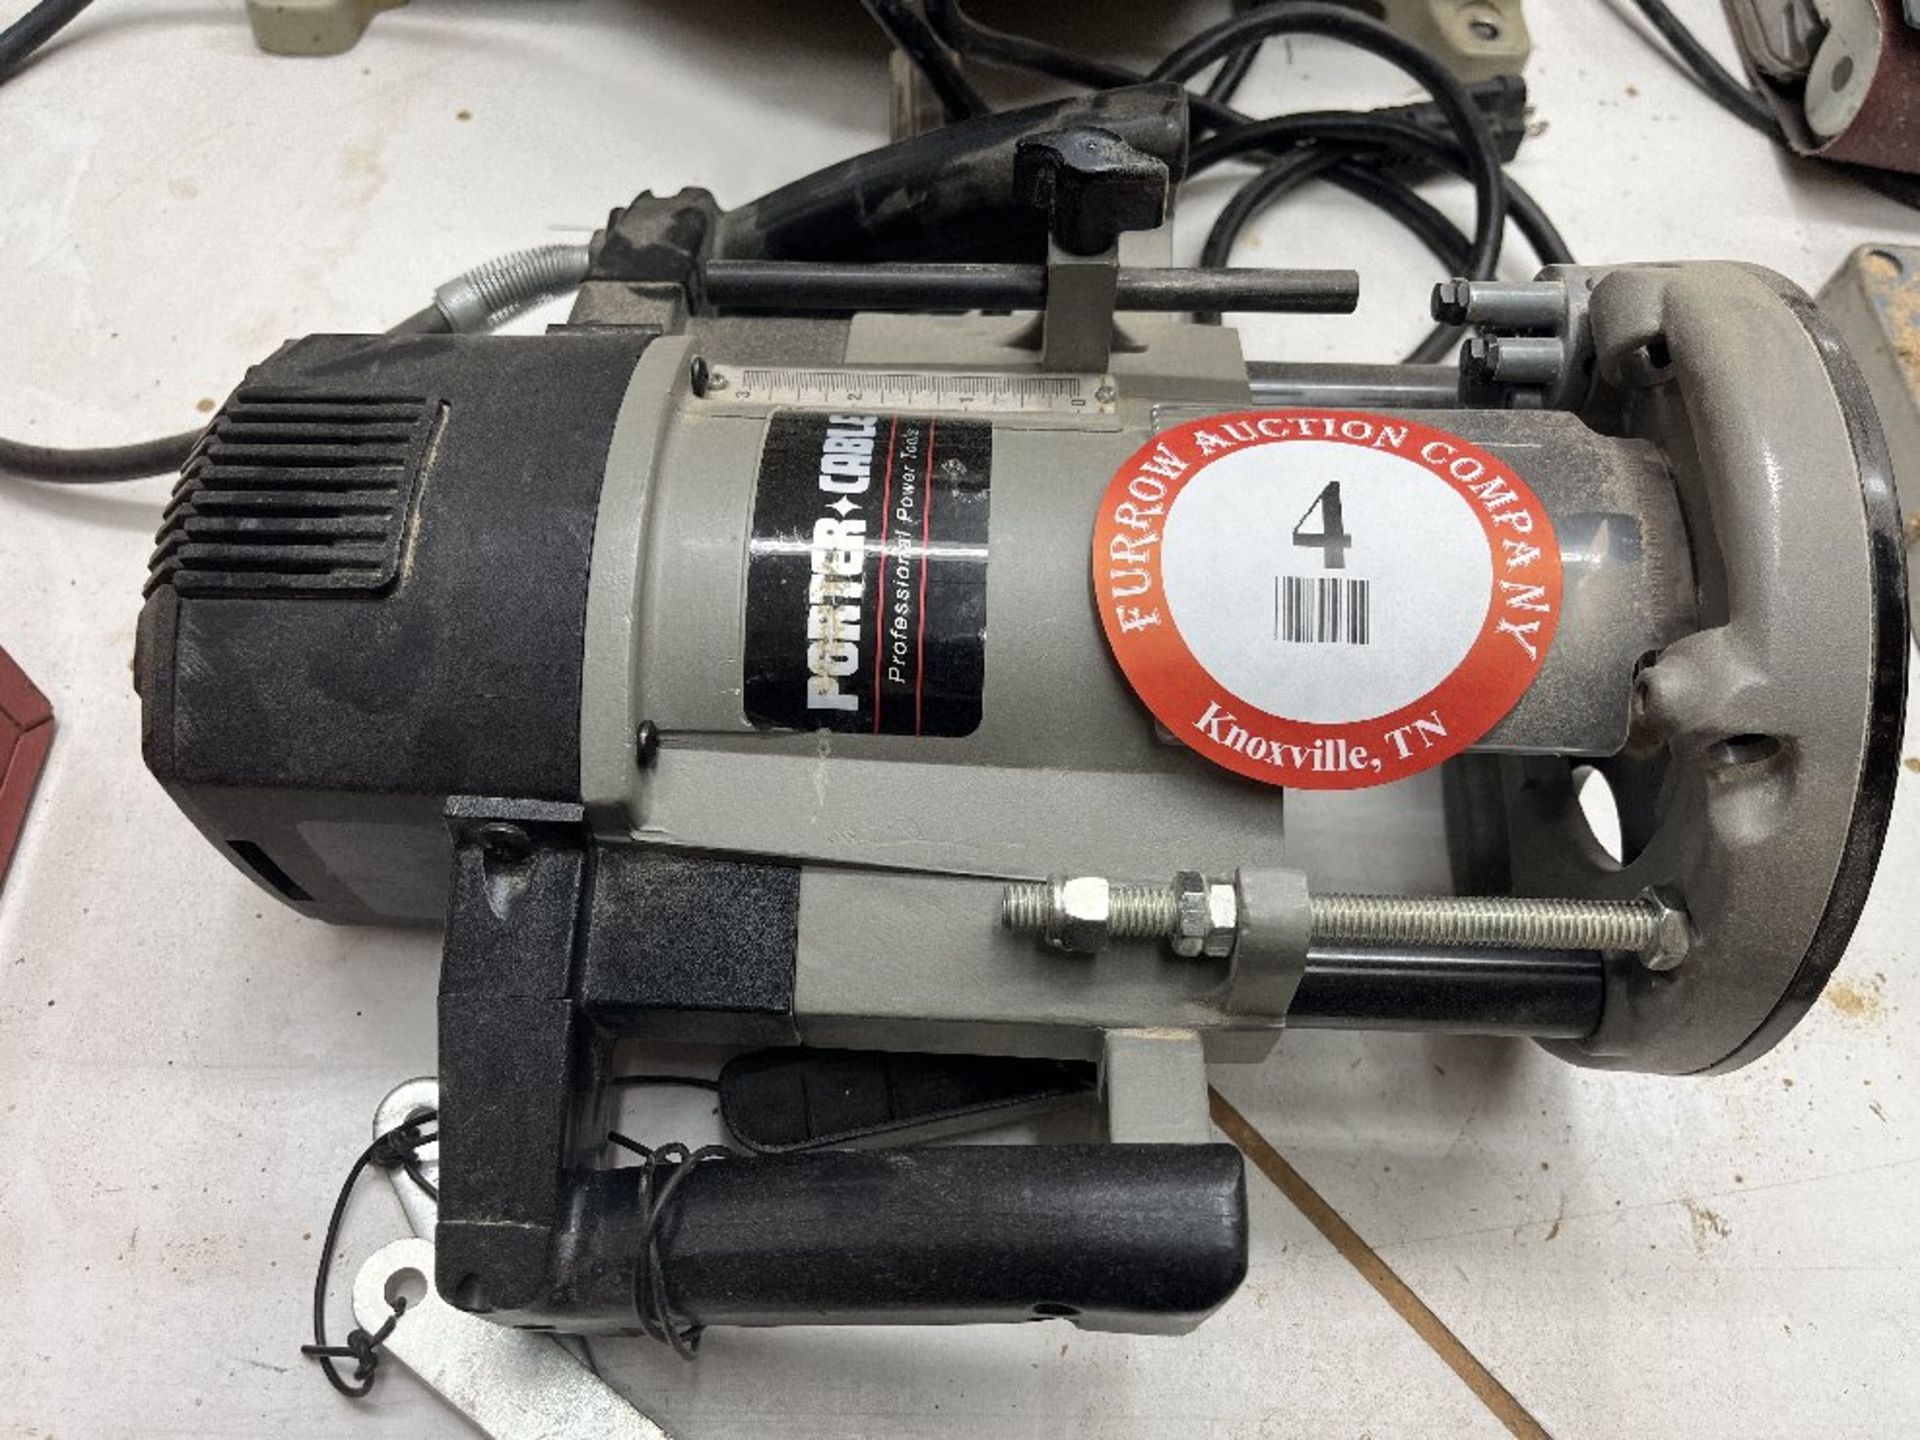 Porter Cable Model 7538 Plunge Router